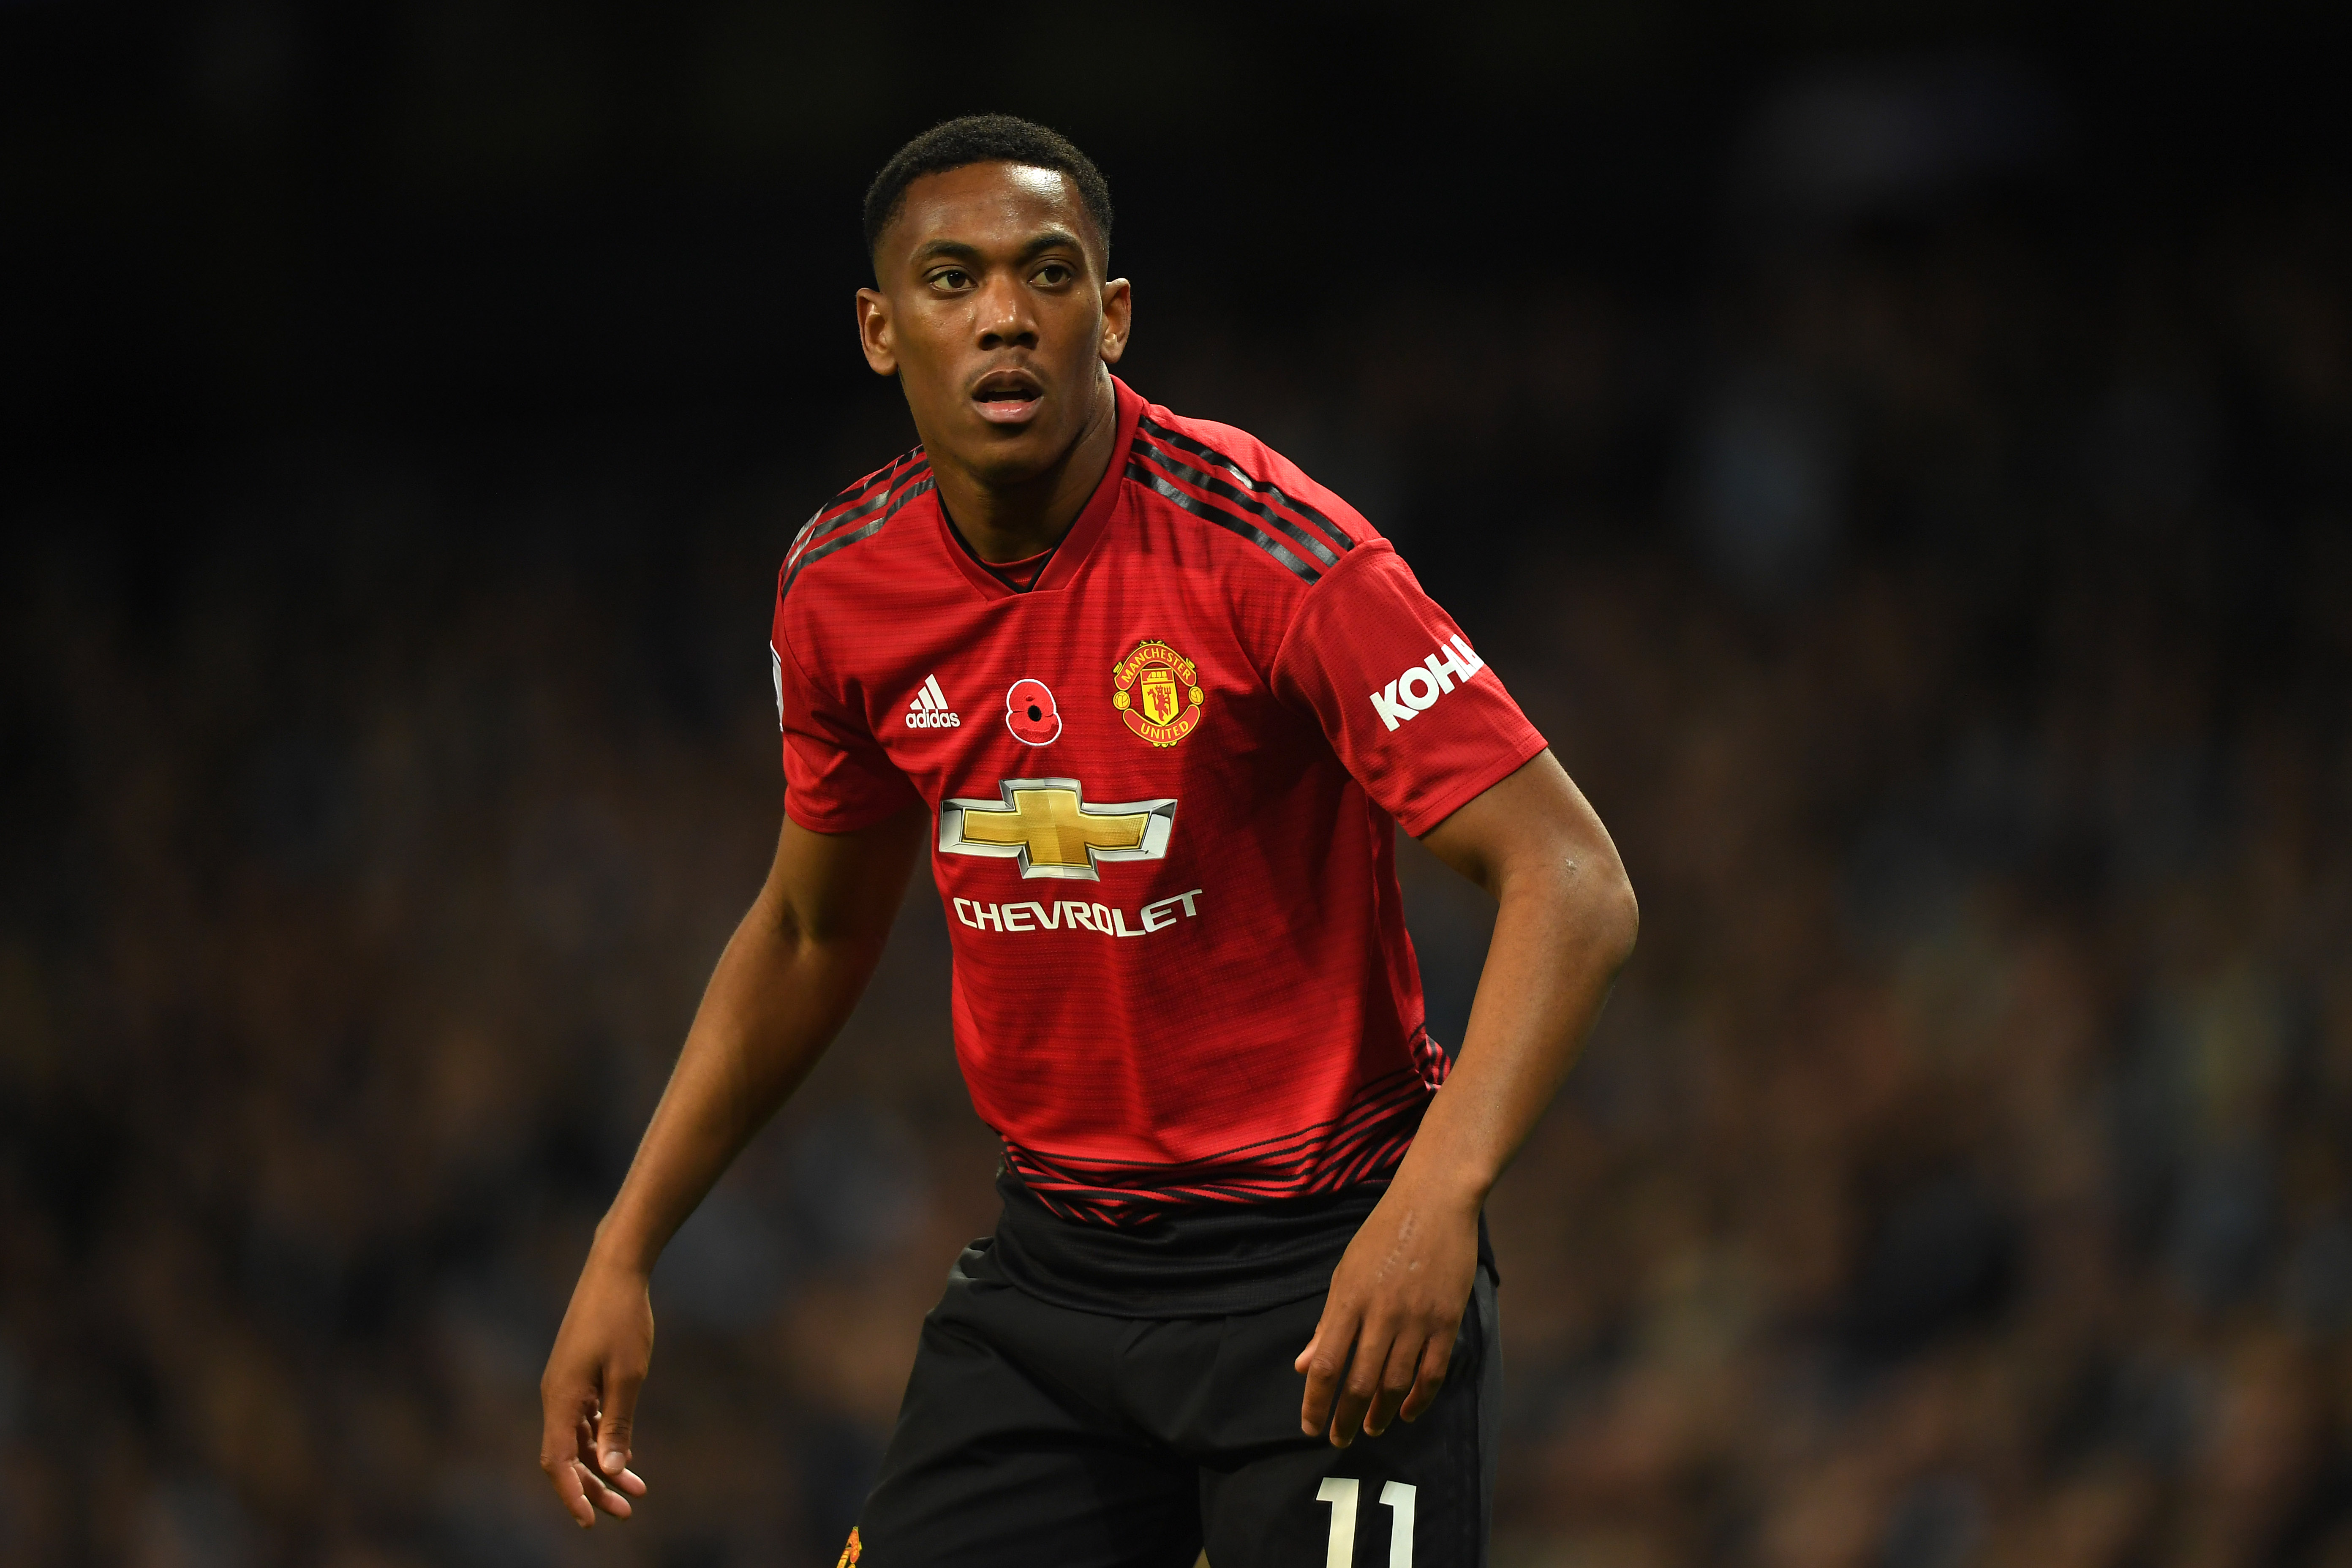 MANCHESTER, ENGLAND - NOVEMBER 11: Anthony Martial of Manchester United loos on during the Premier League match between Manchester City and Manchester United at Etihad Stadium on November 11, 2018 in Manchester, United Kingdom. (Photo by Mike Hewitt/Getty Images)